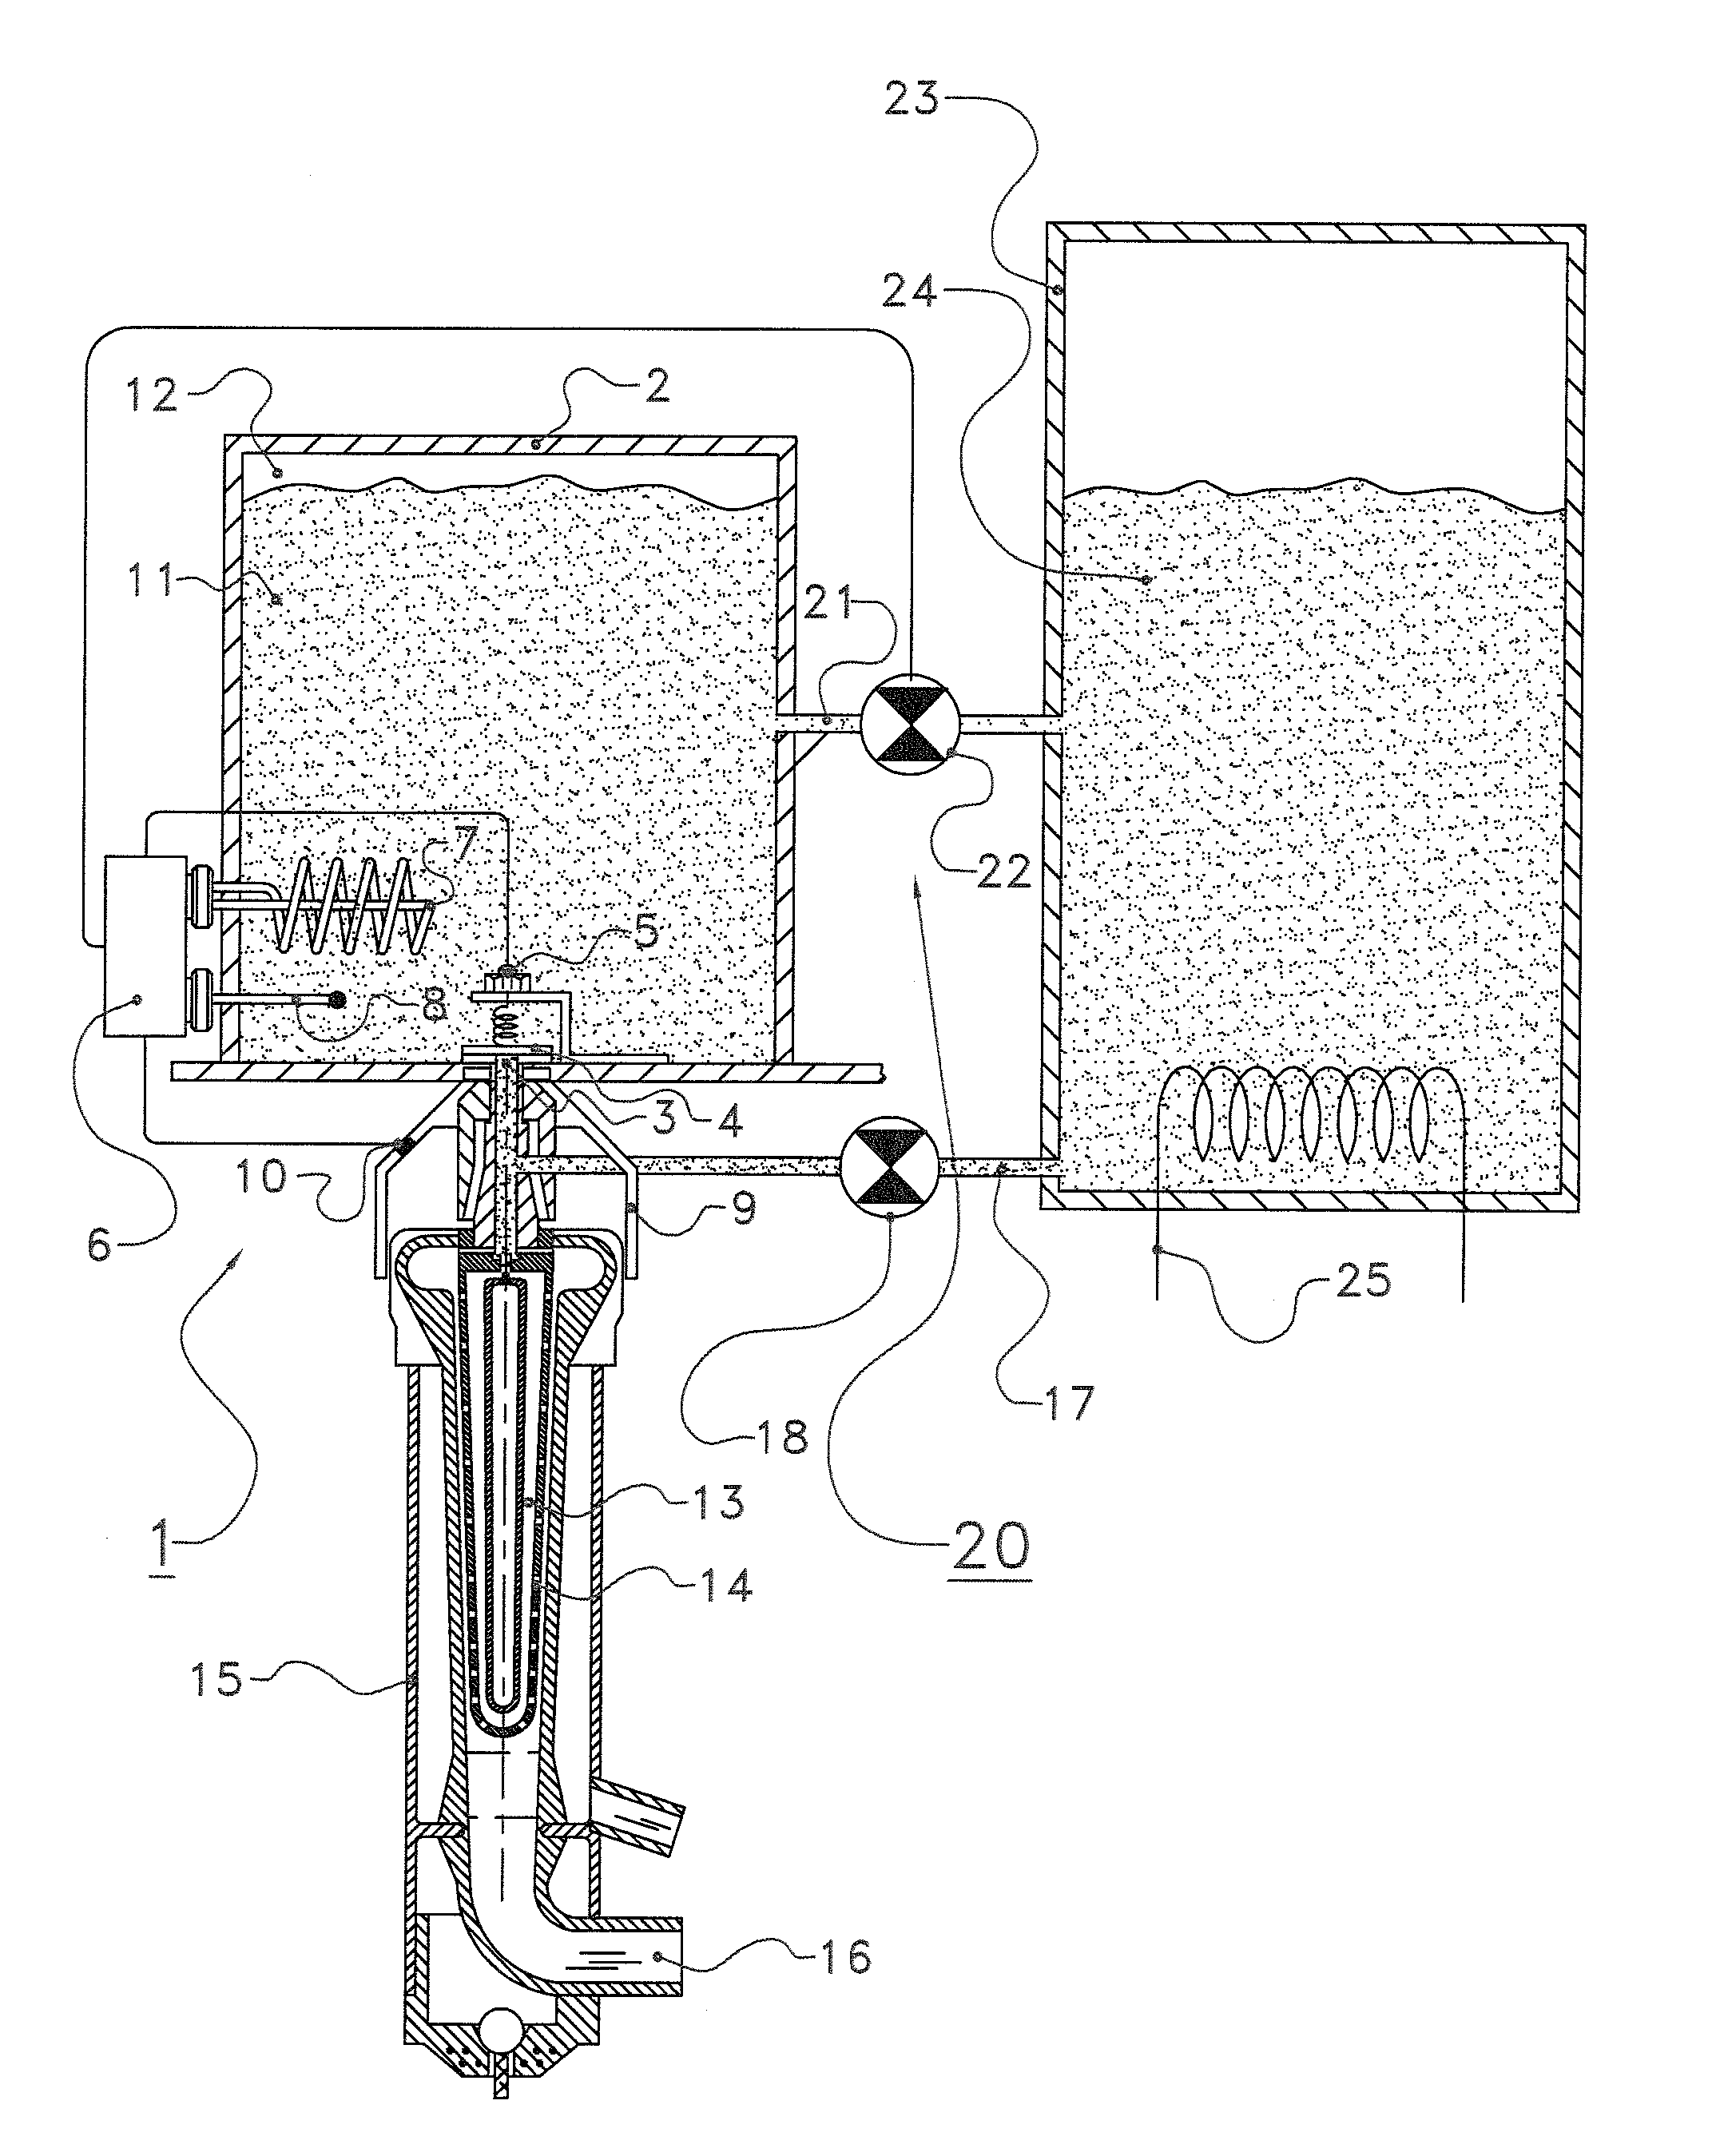 Teat cup cleaning device and method related thereto